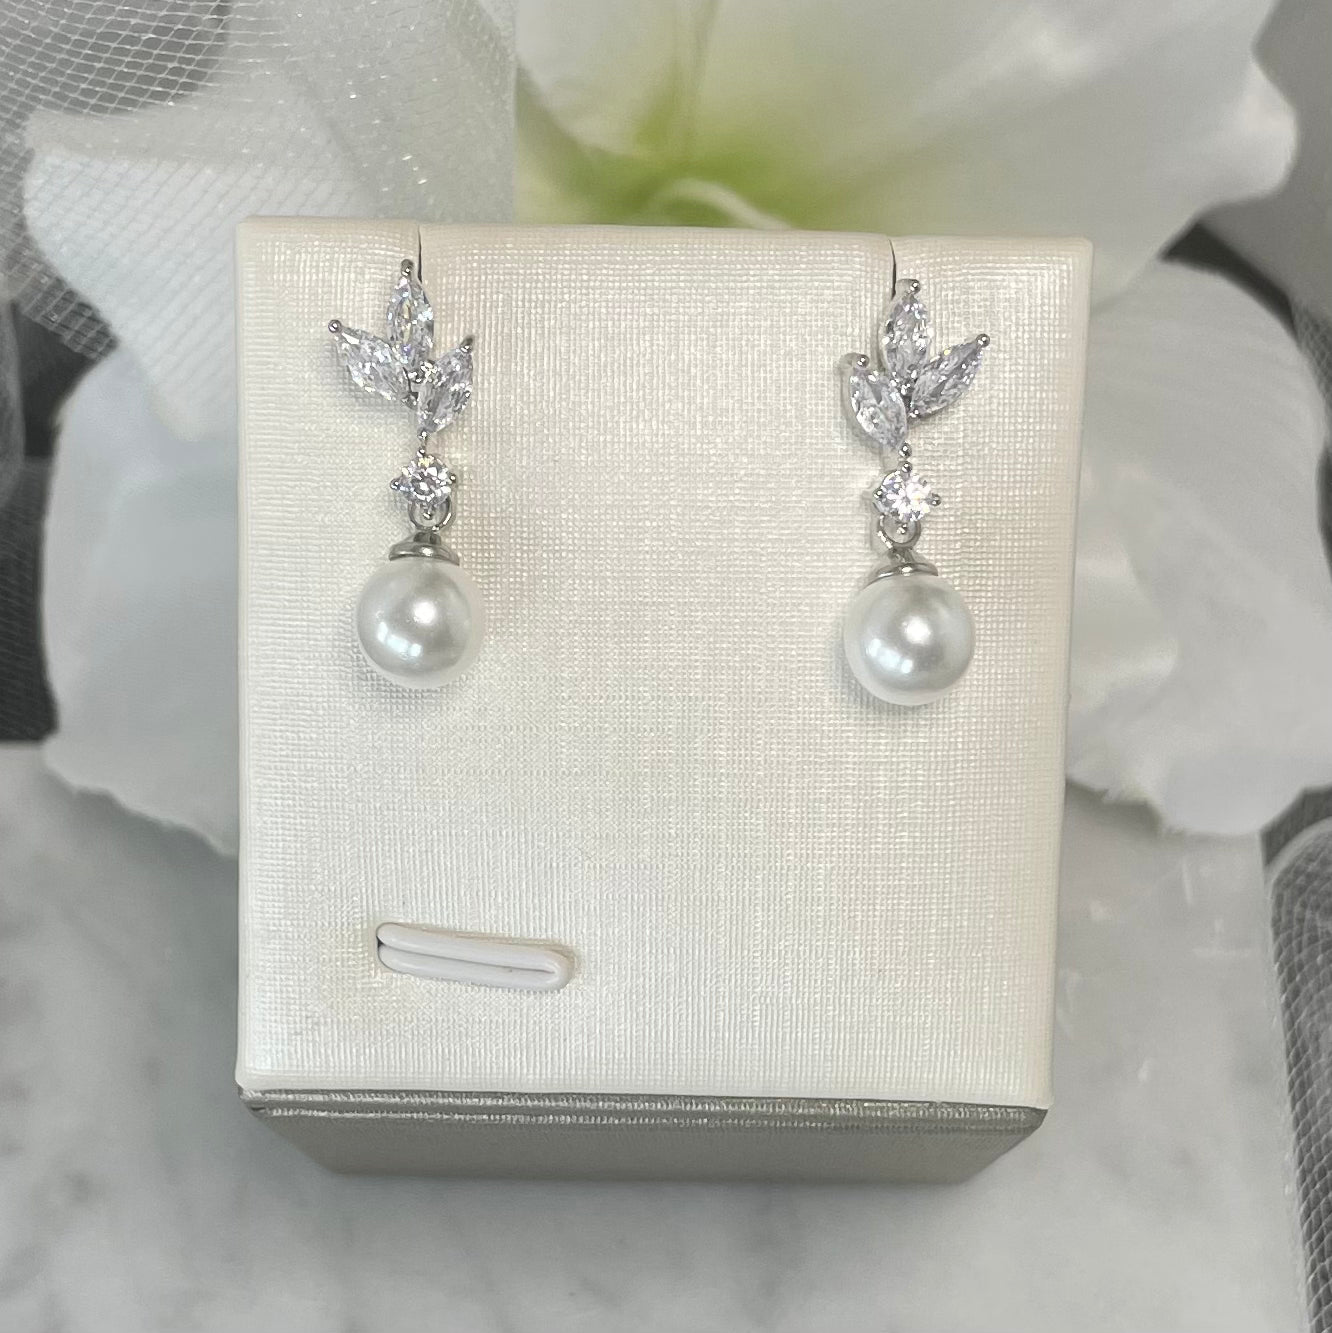 Selena leaf-design earrings with crystal embellishments and a dangling pearl accent.